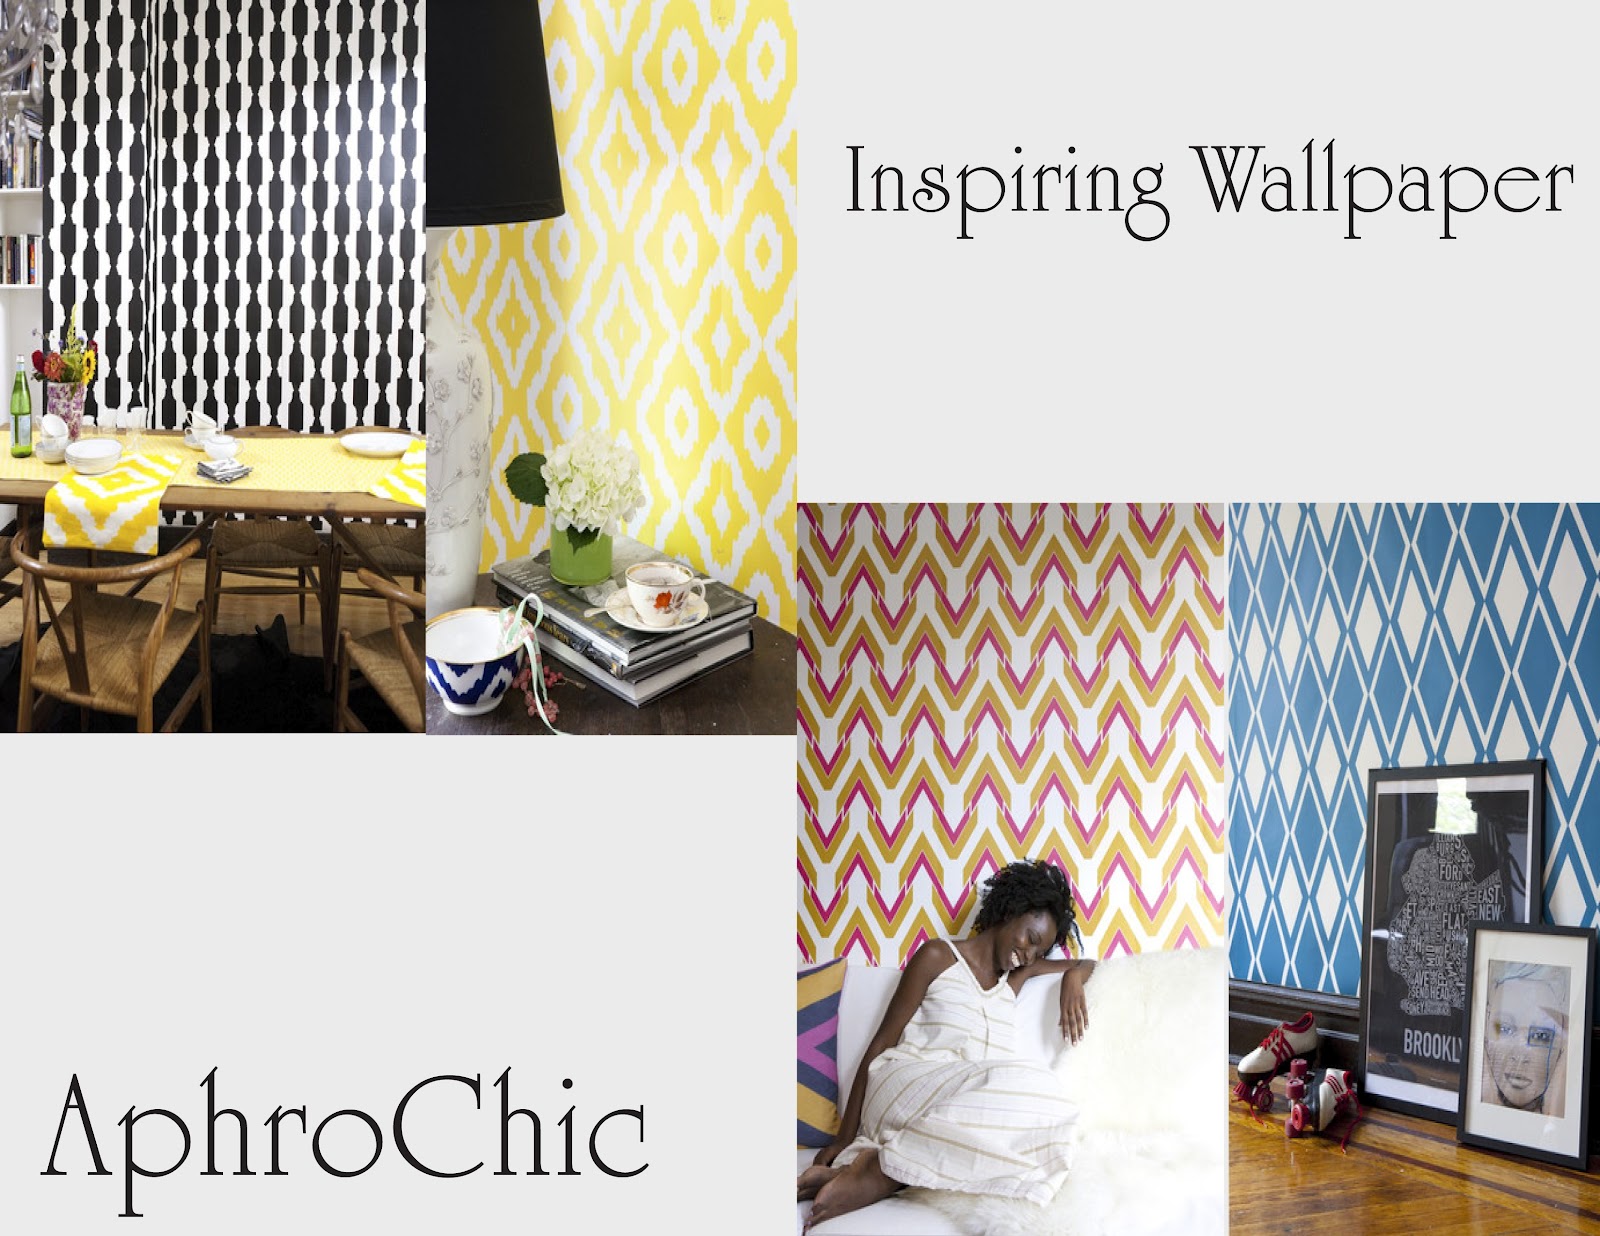 Can you see any of their wallpapers gracing the walls of your home or ...